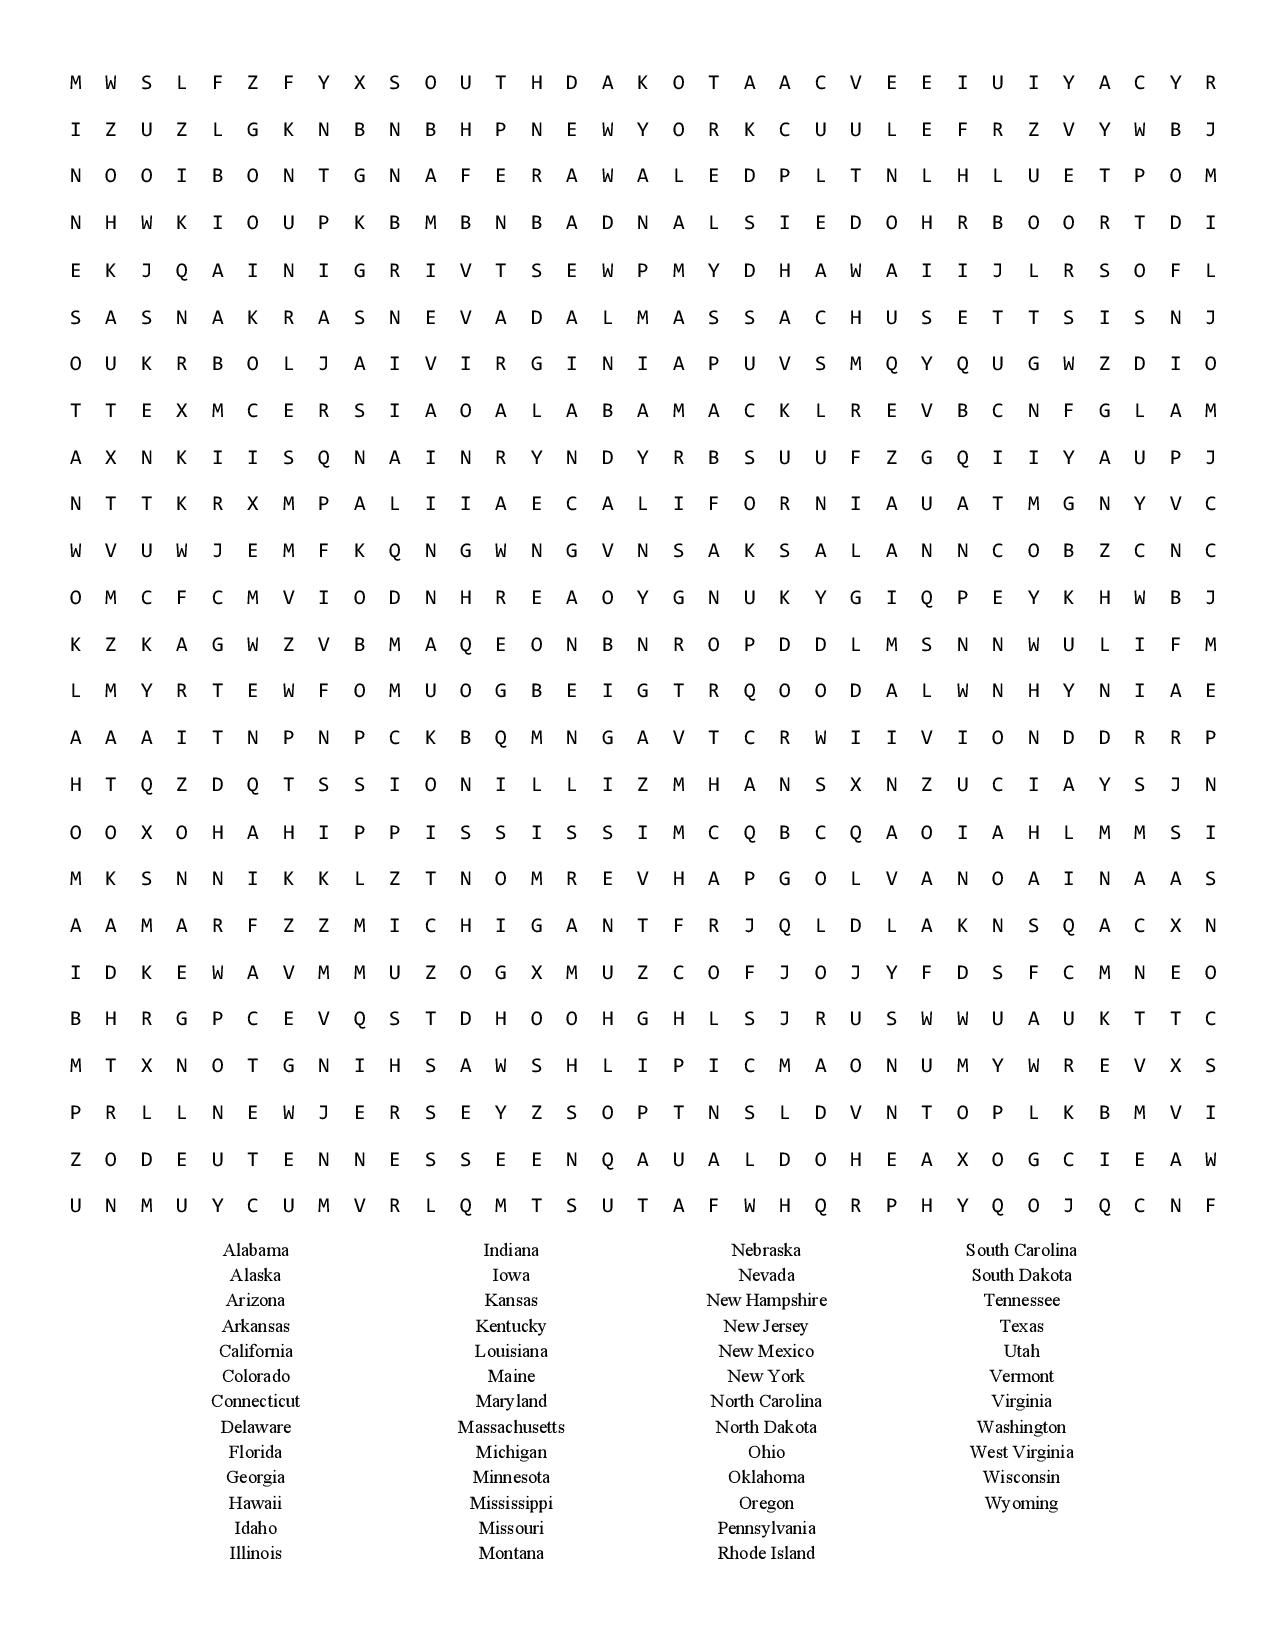 50 States Wordsearch | Anything About Life